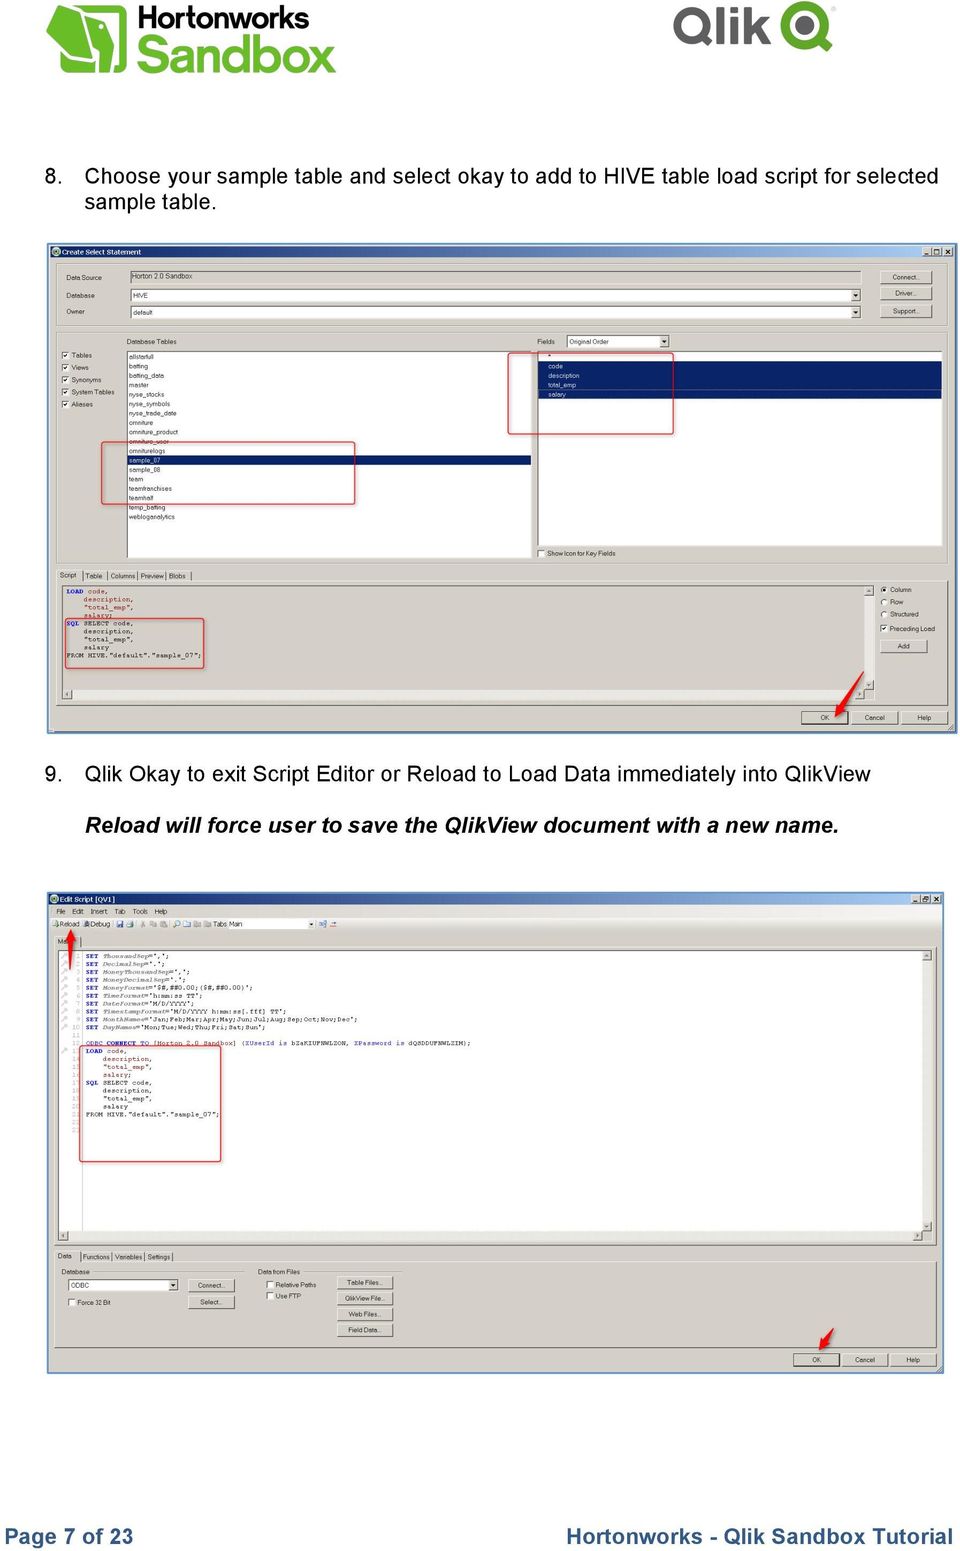 Qlik Okay to exit Script Editor or Reload to Load Data immediately